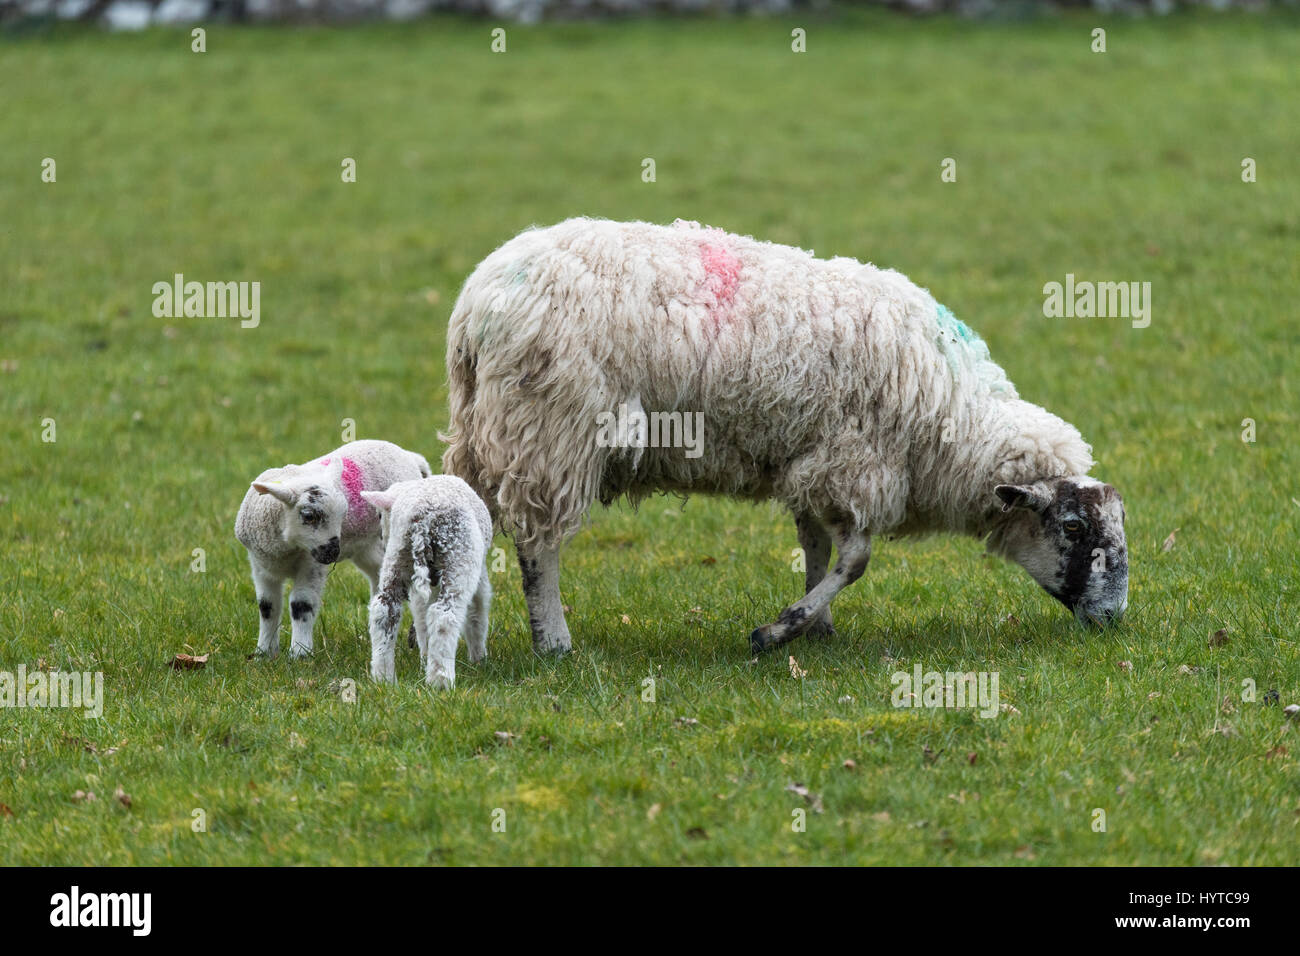 Mother sheep (ewe) & 2 twin lambs standing together in farm field in springtime (Mum grazing, offspring stand close) - North Yorkshire, England, GB UK Stock Photo